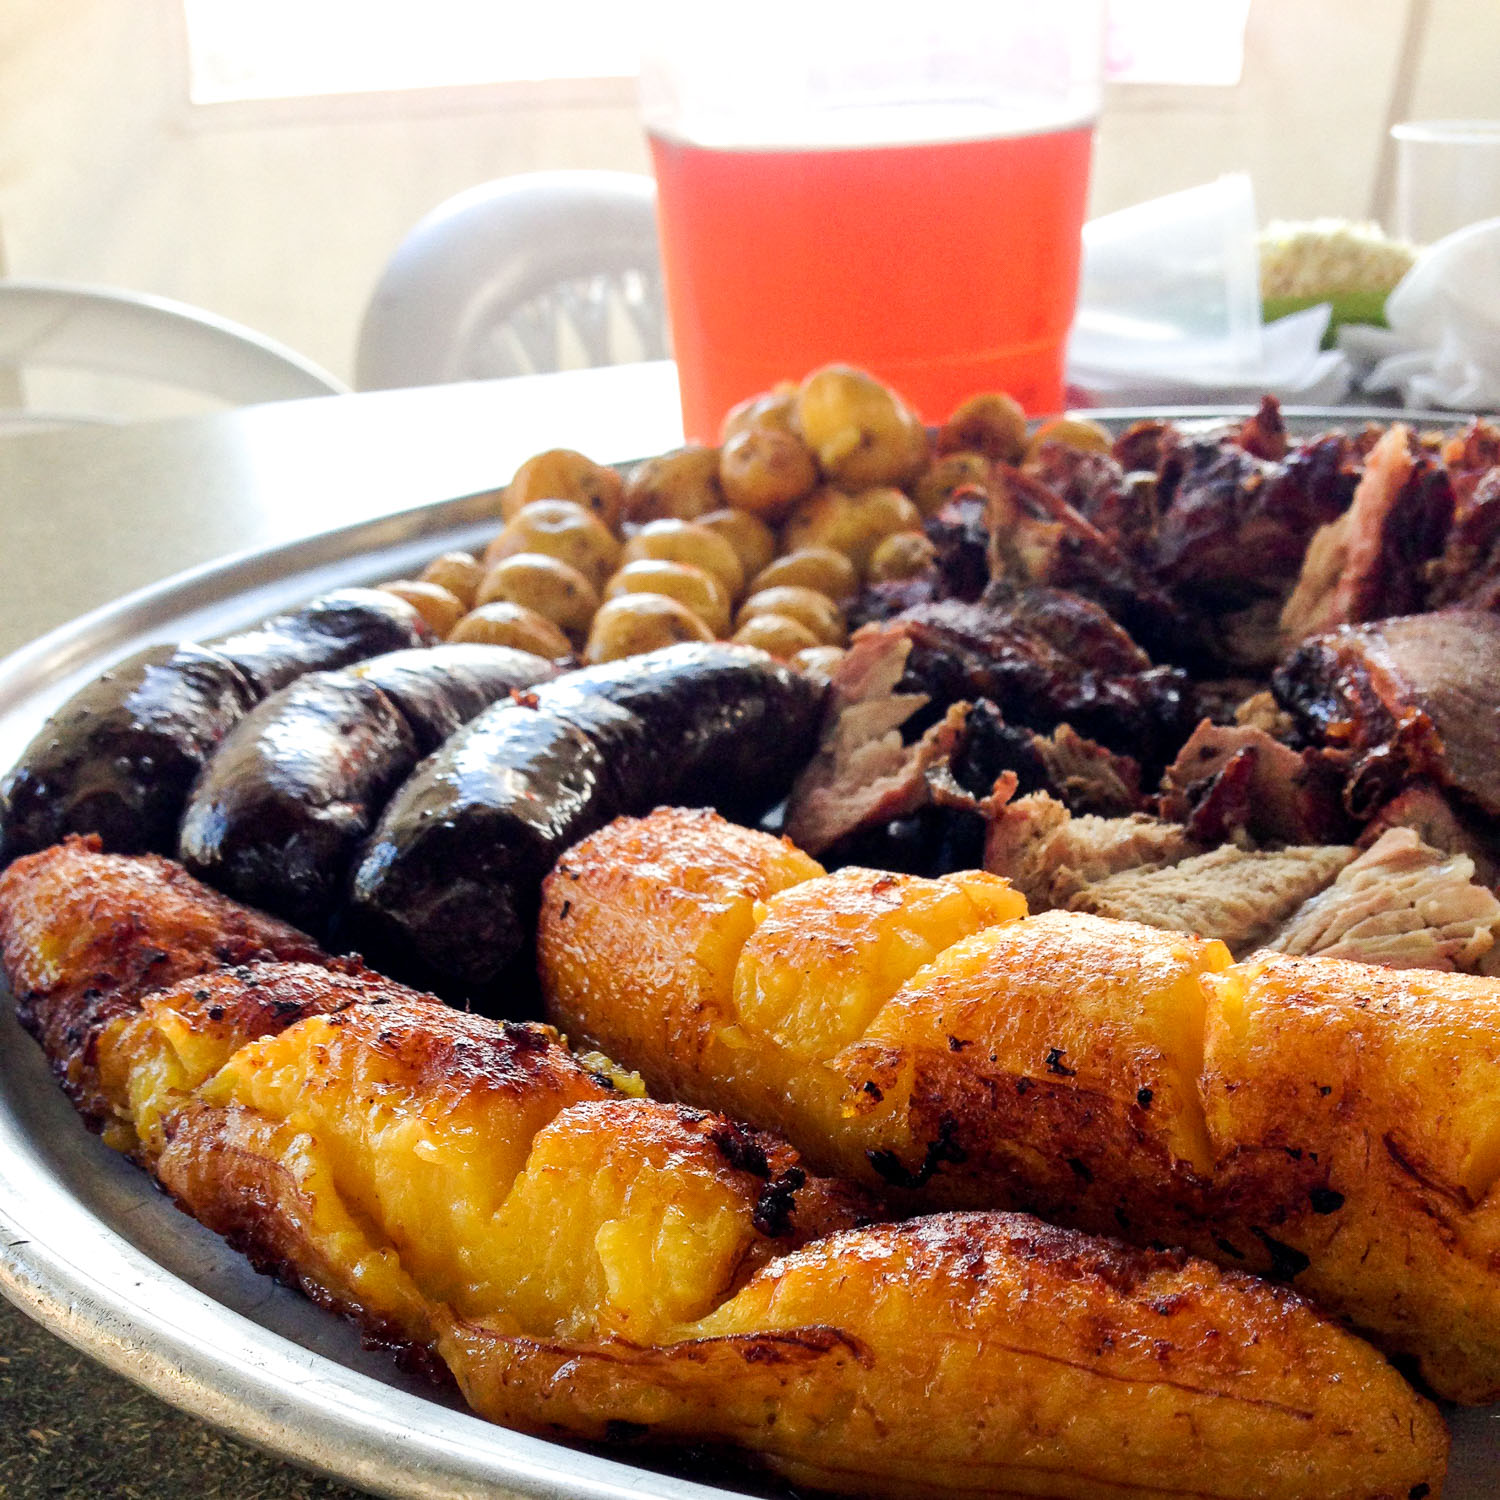 Potatoes, blood sausage, plantain, and barbecue in Colombia (Eat Me. Drink Me.)